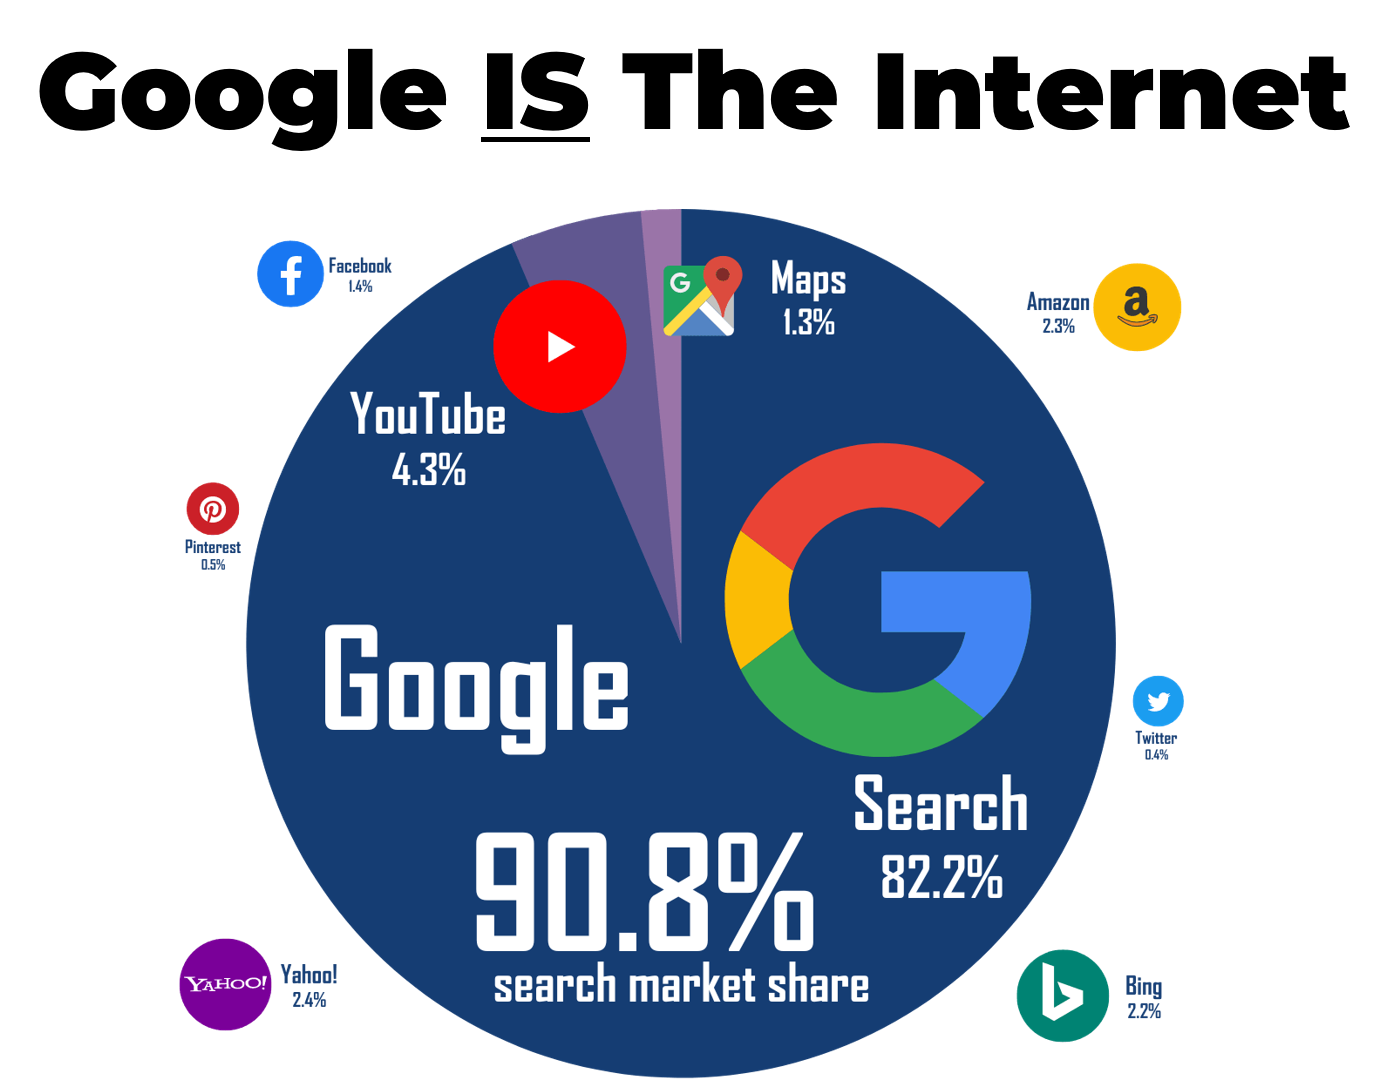 Google IS the Internet